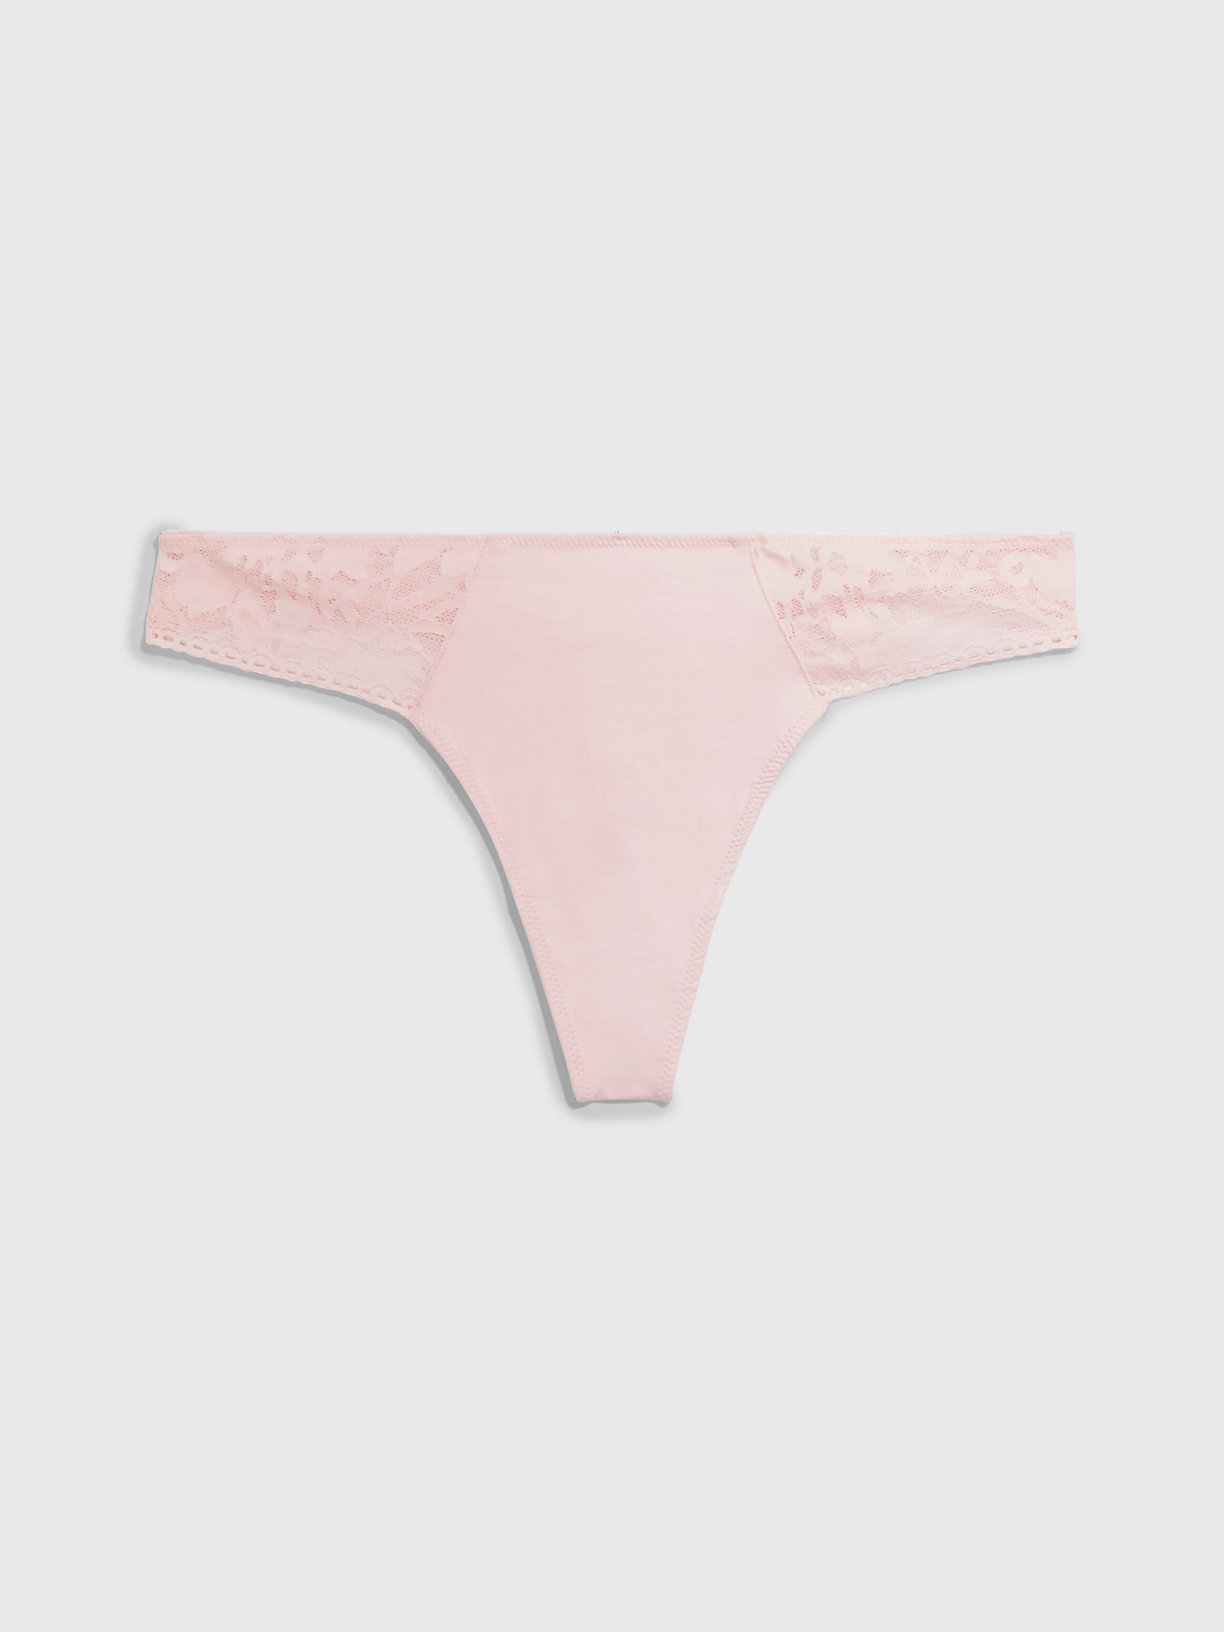 NYMPTHÂ€™S THIGH Thong - Ultra Soft Lace for women CALVIN KLEIN